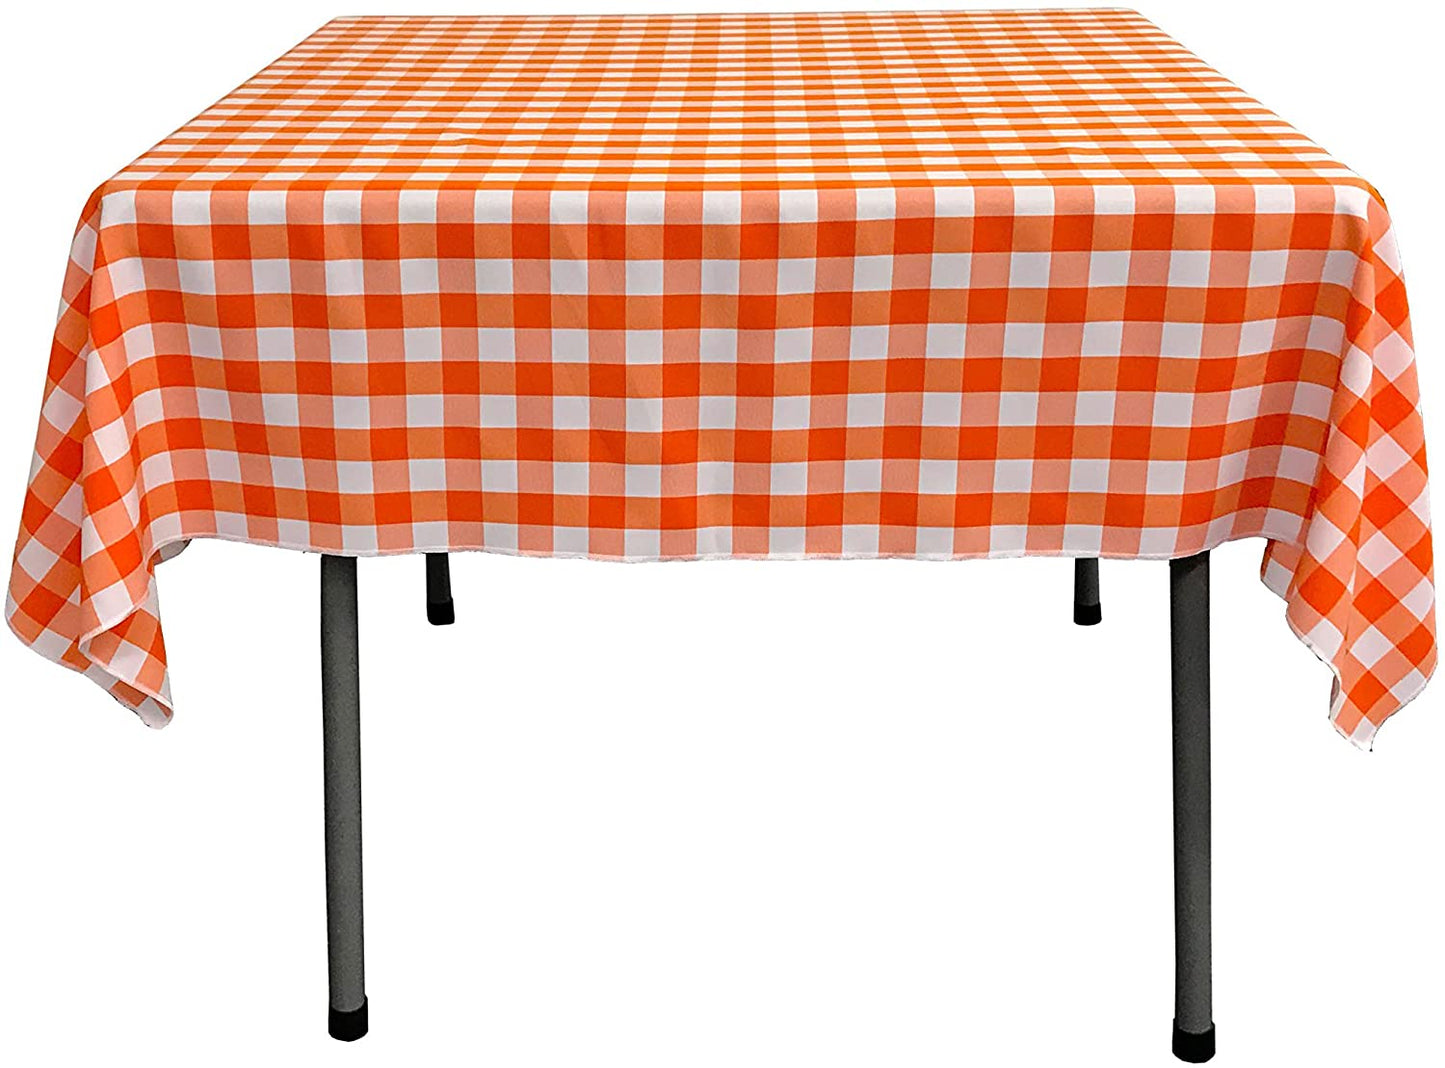 Gingham Checkered Square Tablecloth Orange and White